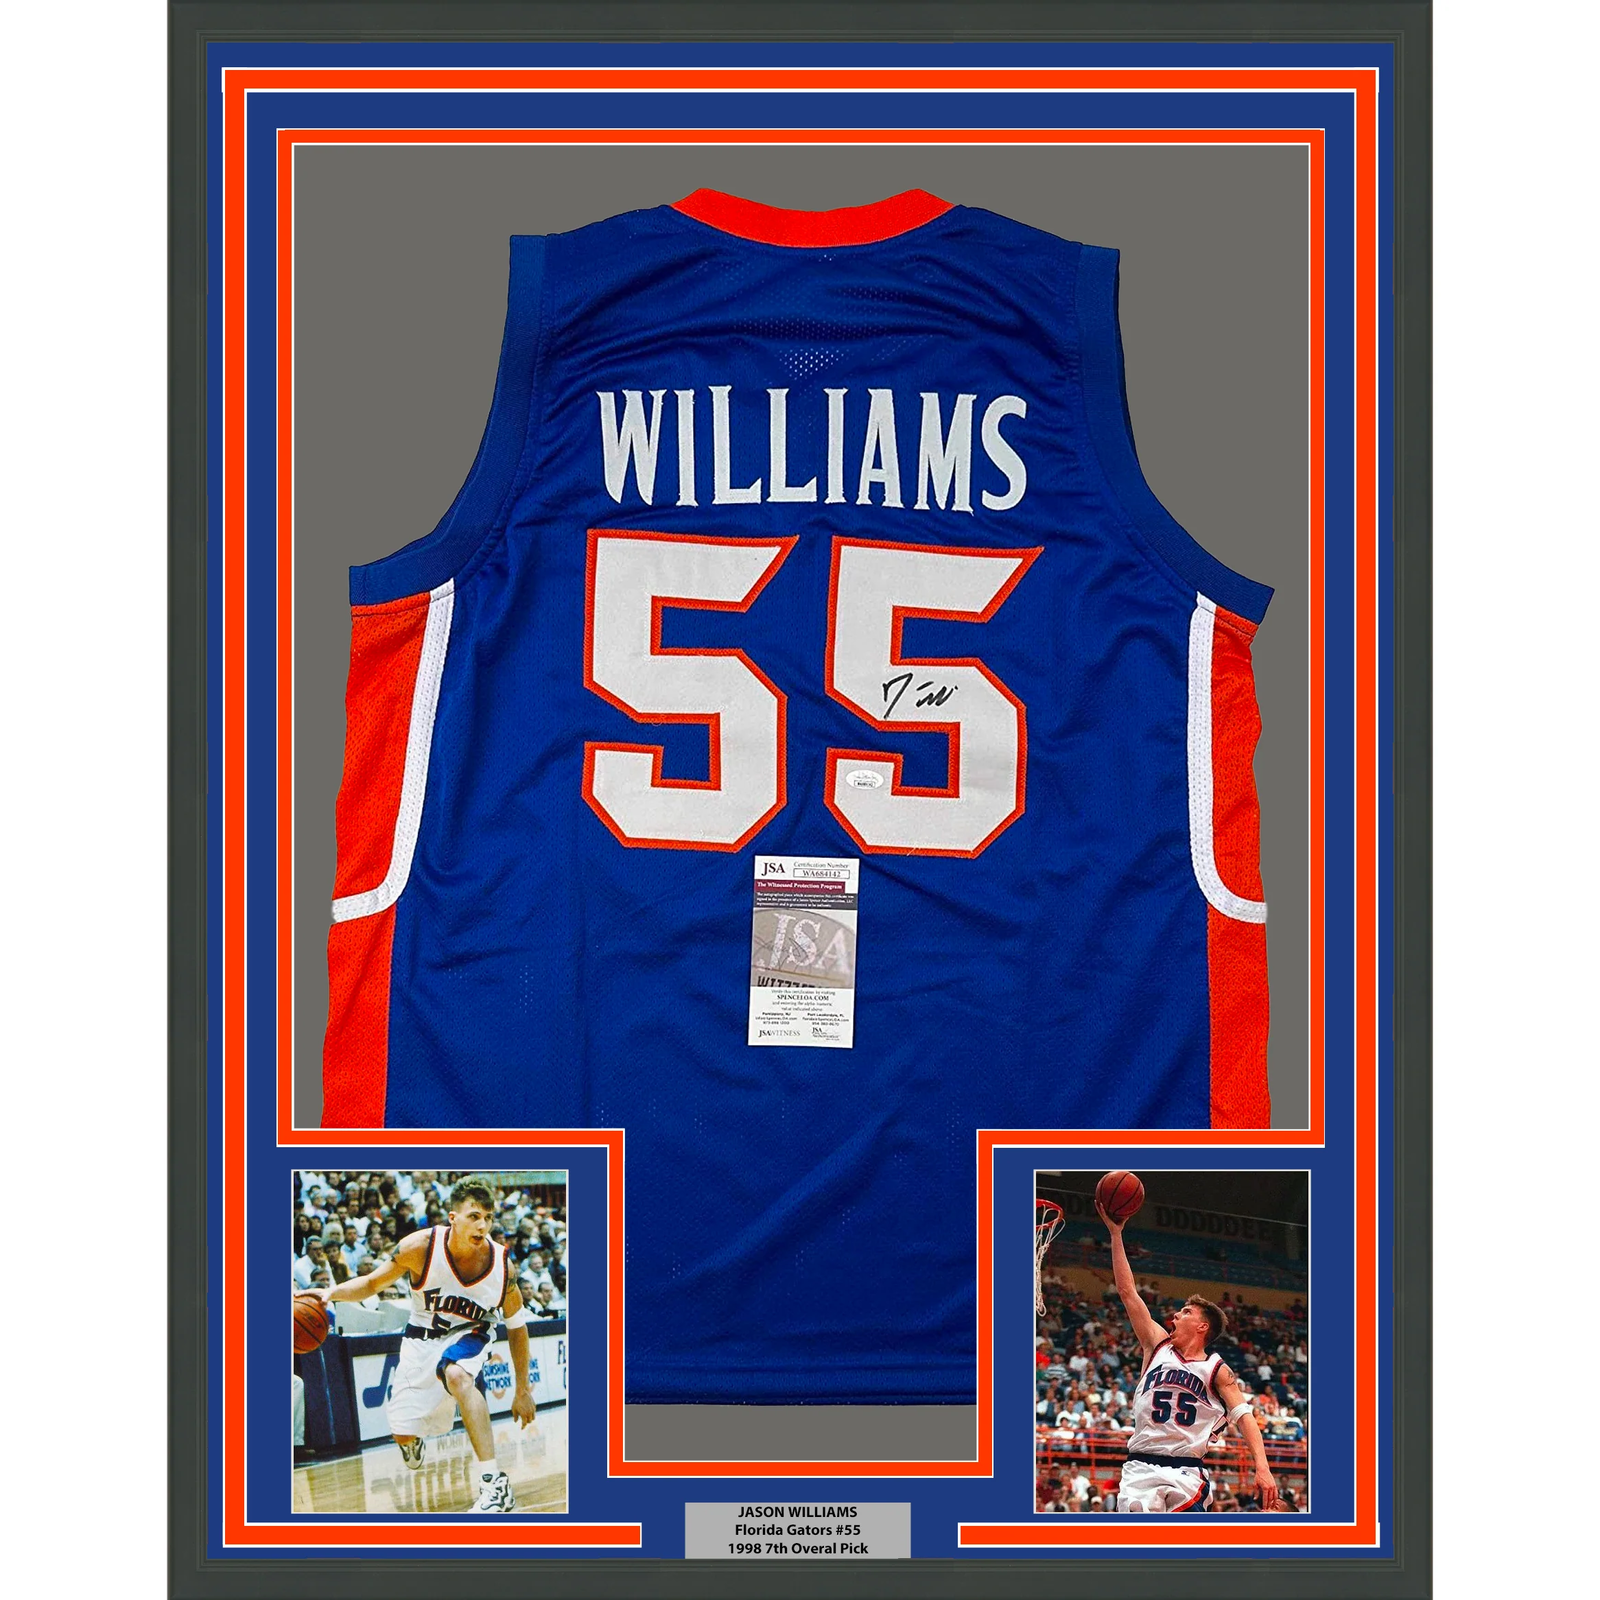 jason williams jersey for sale